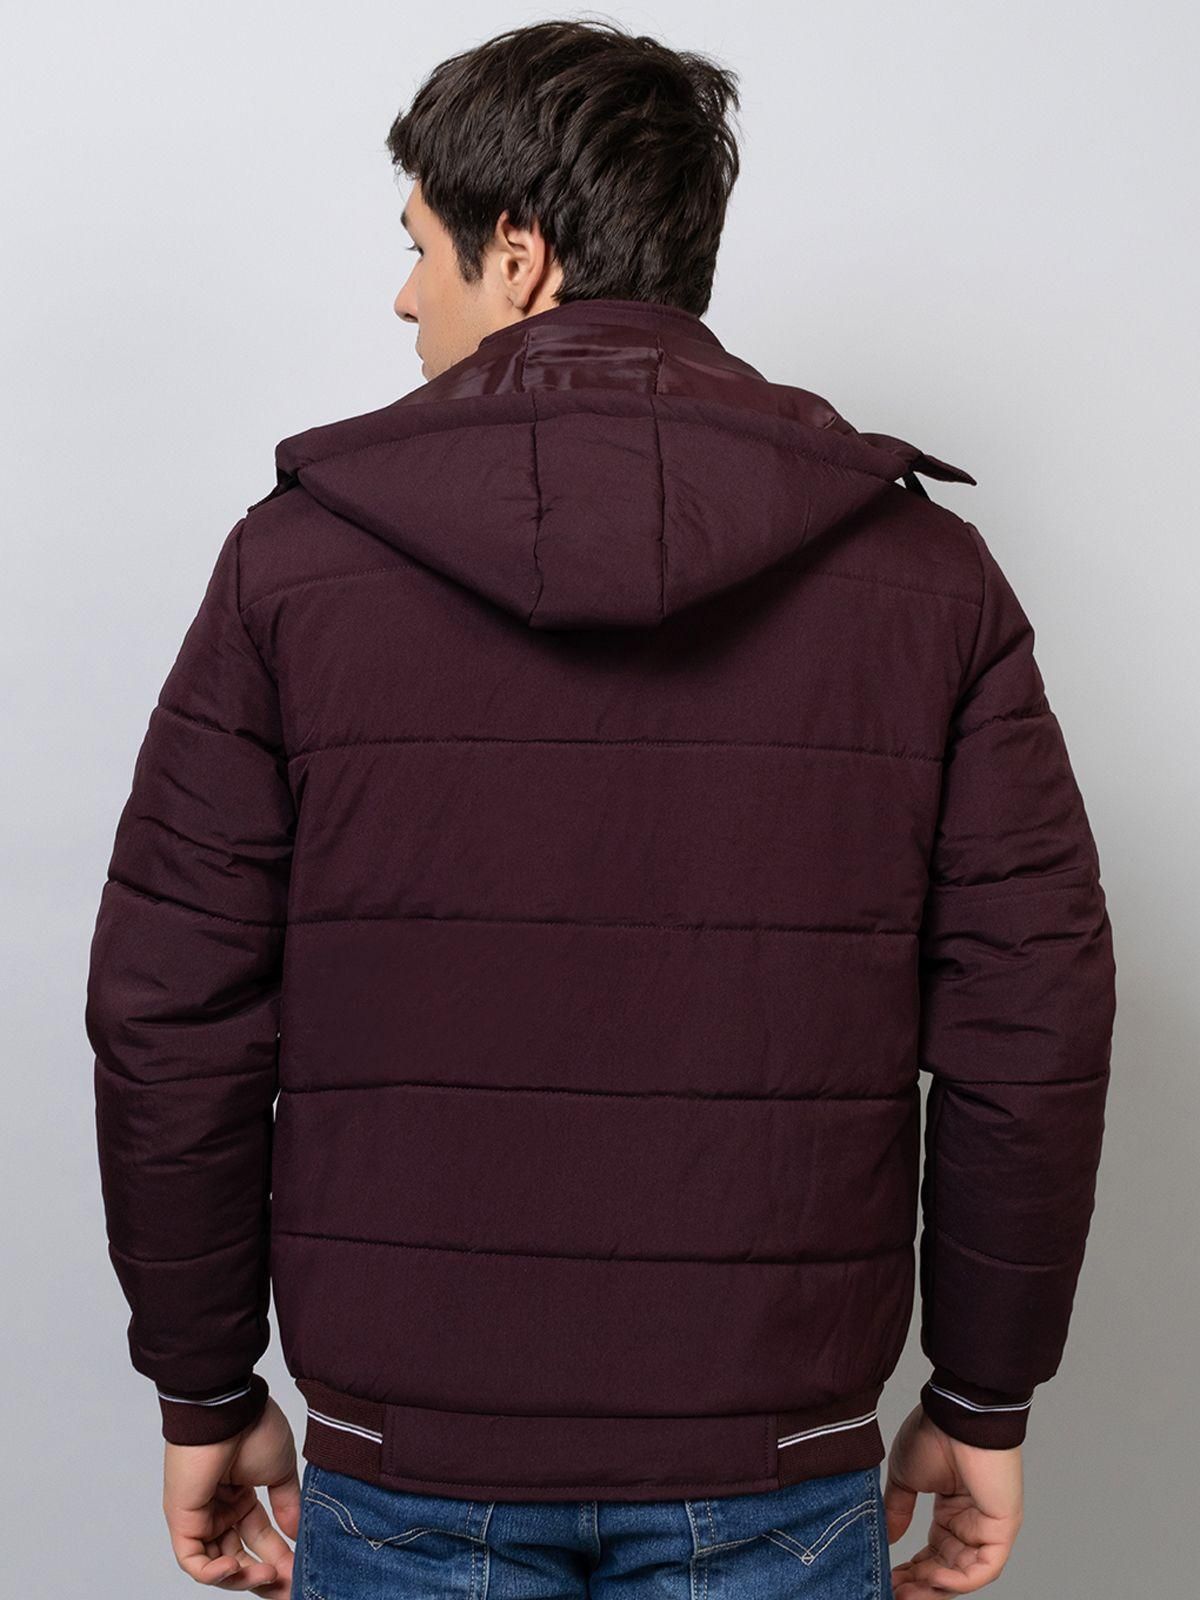 Xohy Men's Full Sleeve Tailored Puffer Wine Hooded Jacket